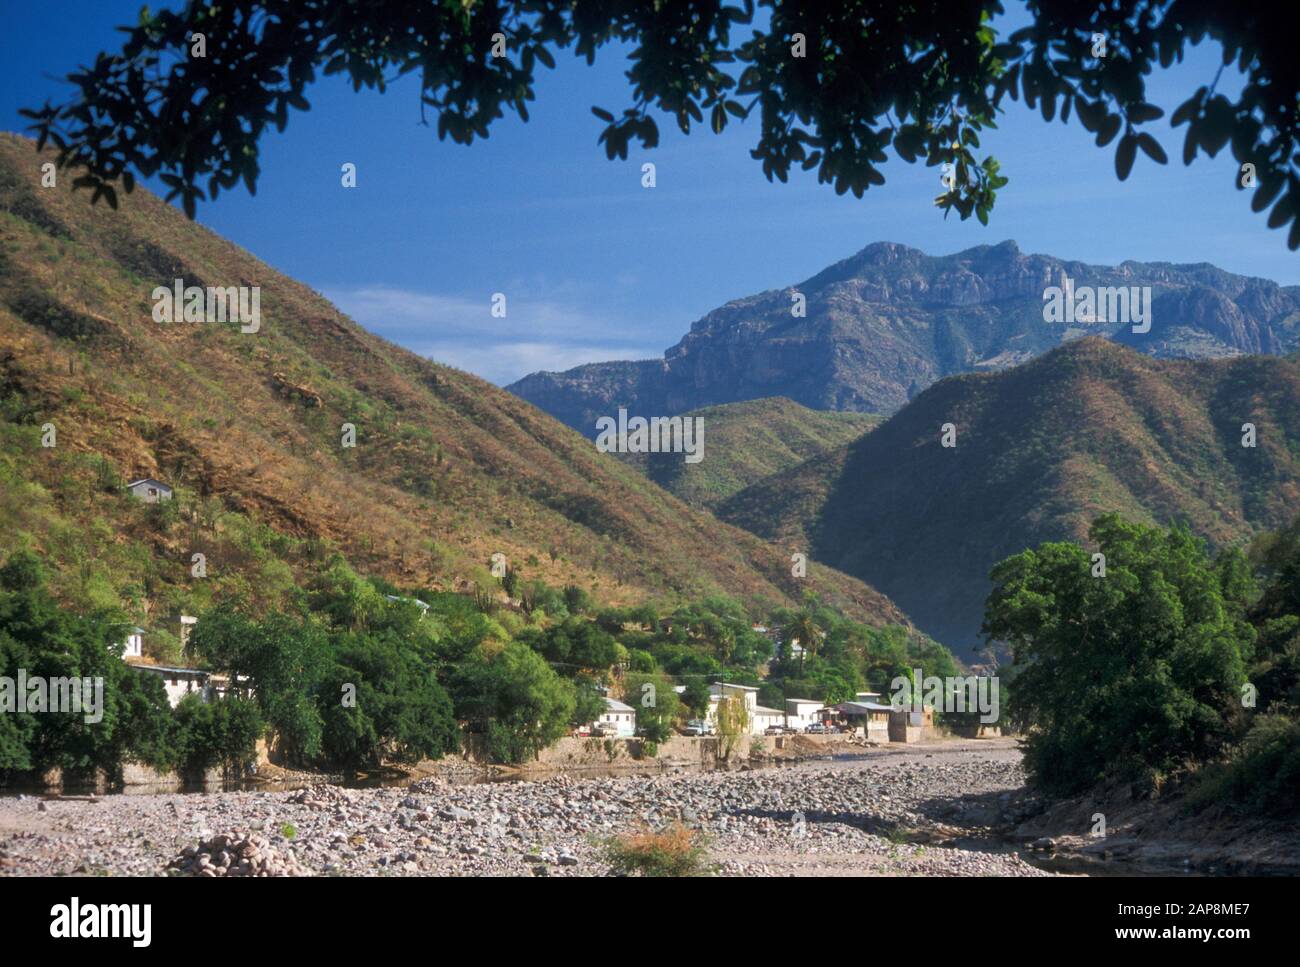 Batopilas village lies at the bottom of the Barranca del Batopilas (canyon) in Chihuahua State, northwestern Mexico Stock Photo